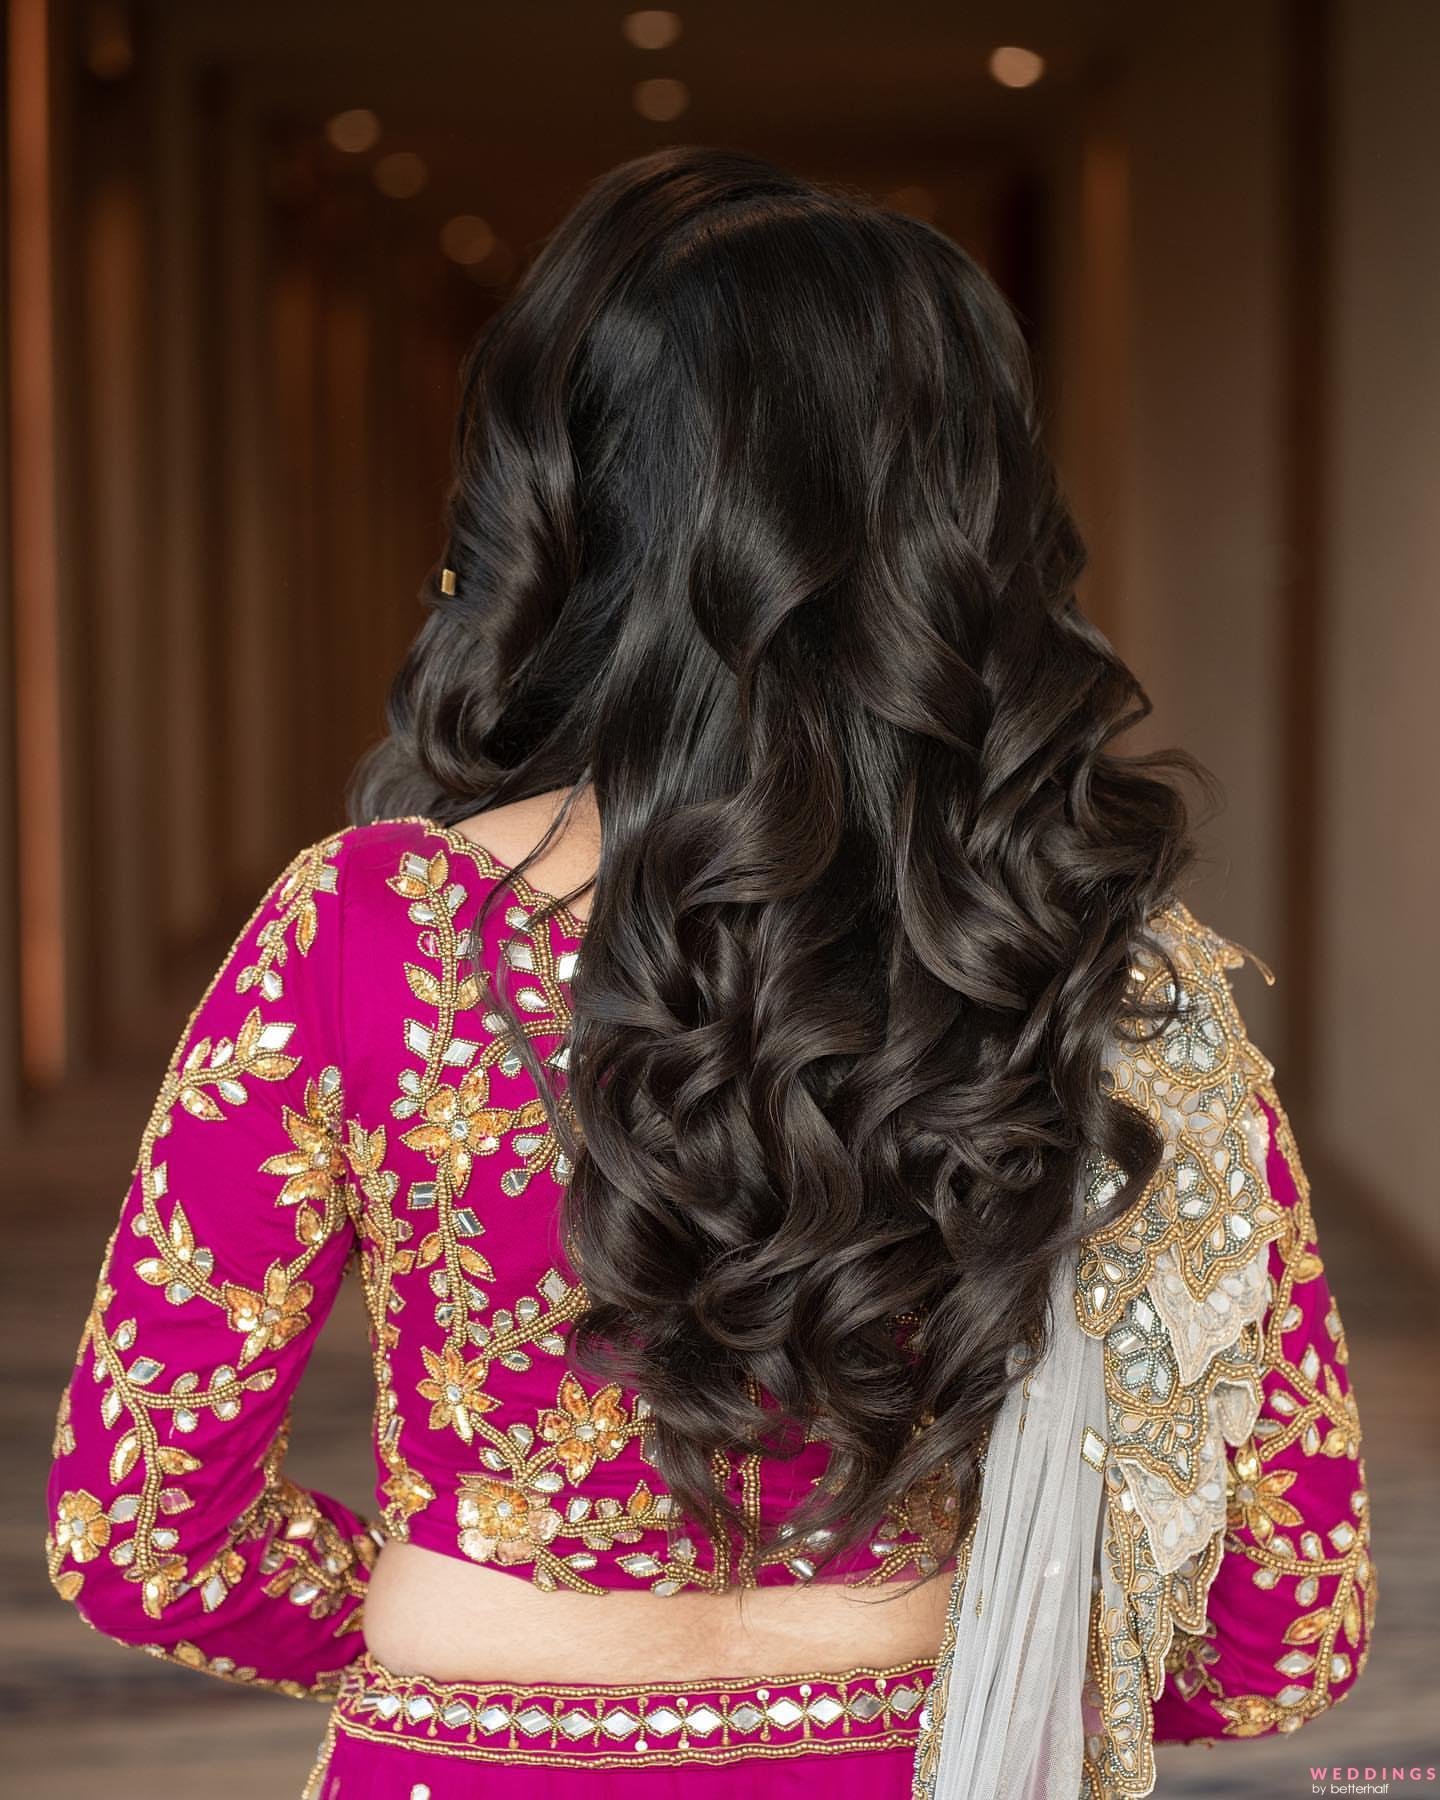 Bridal Hairstyle - ZoWed.com | Blog